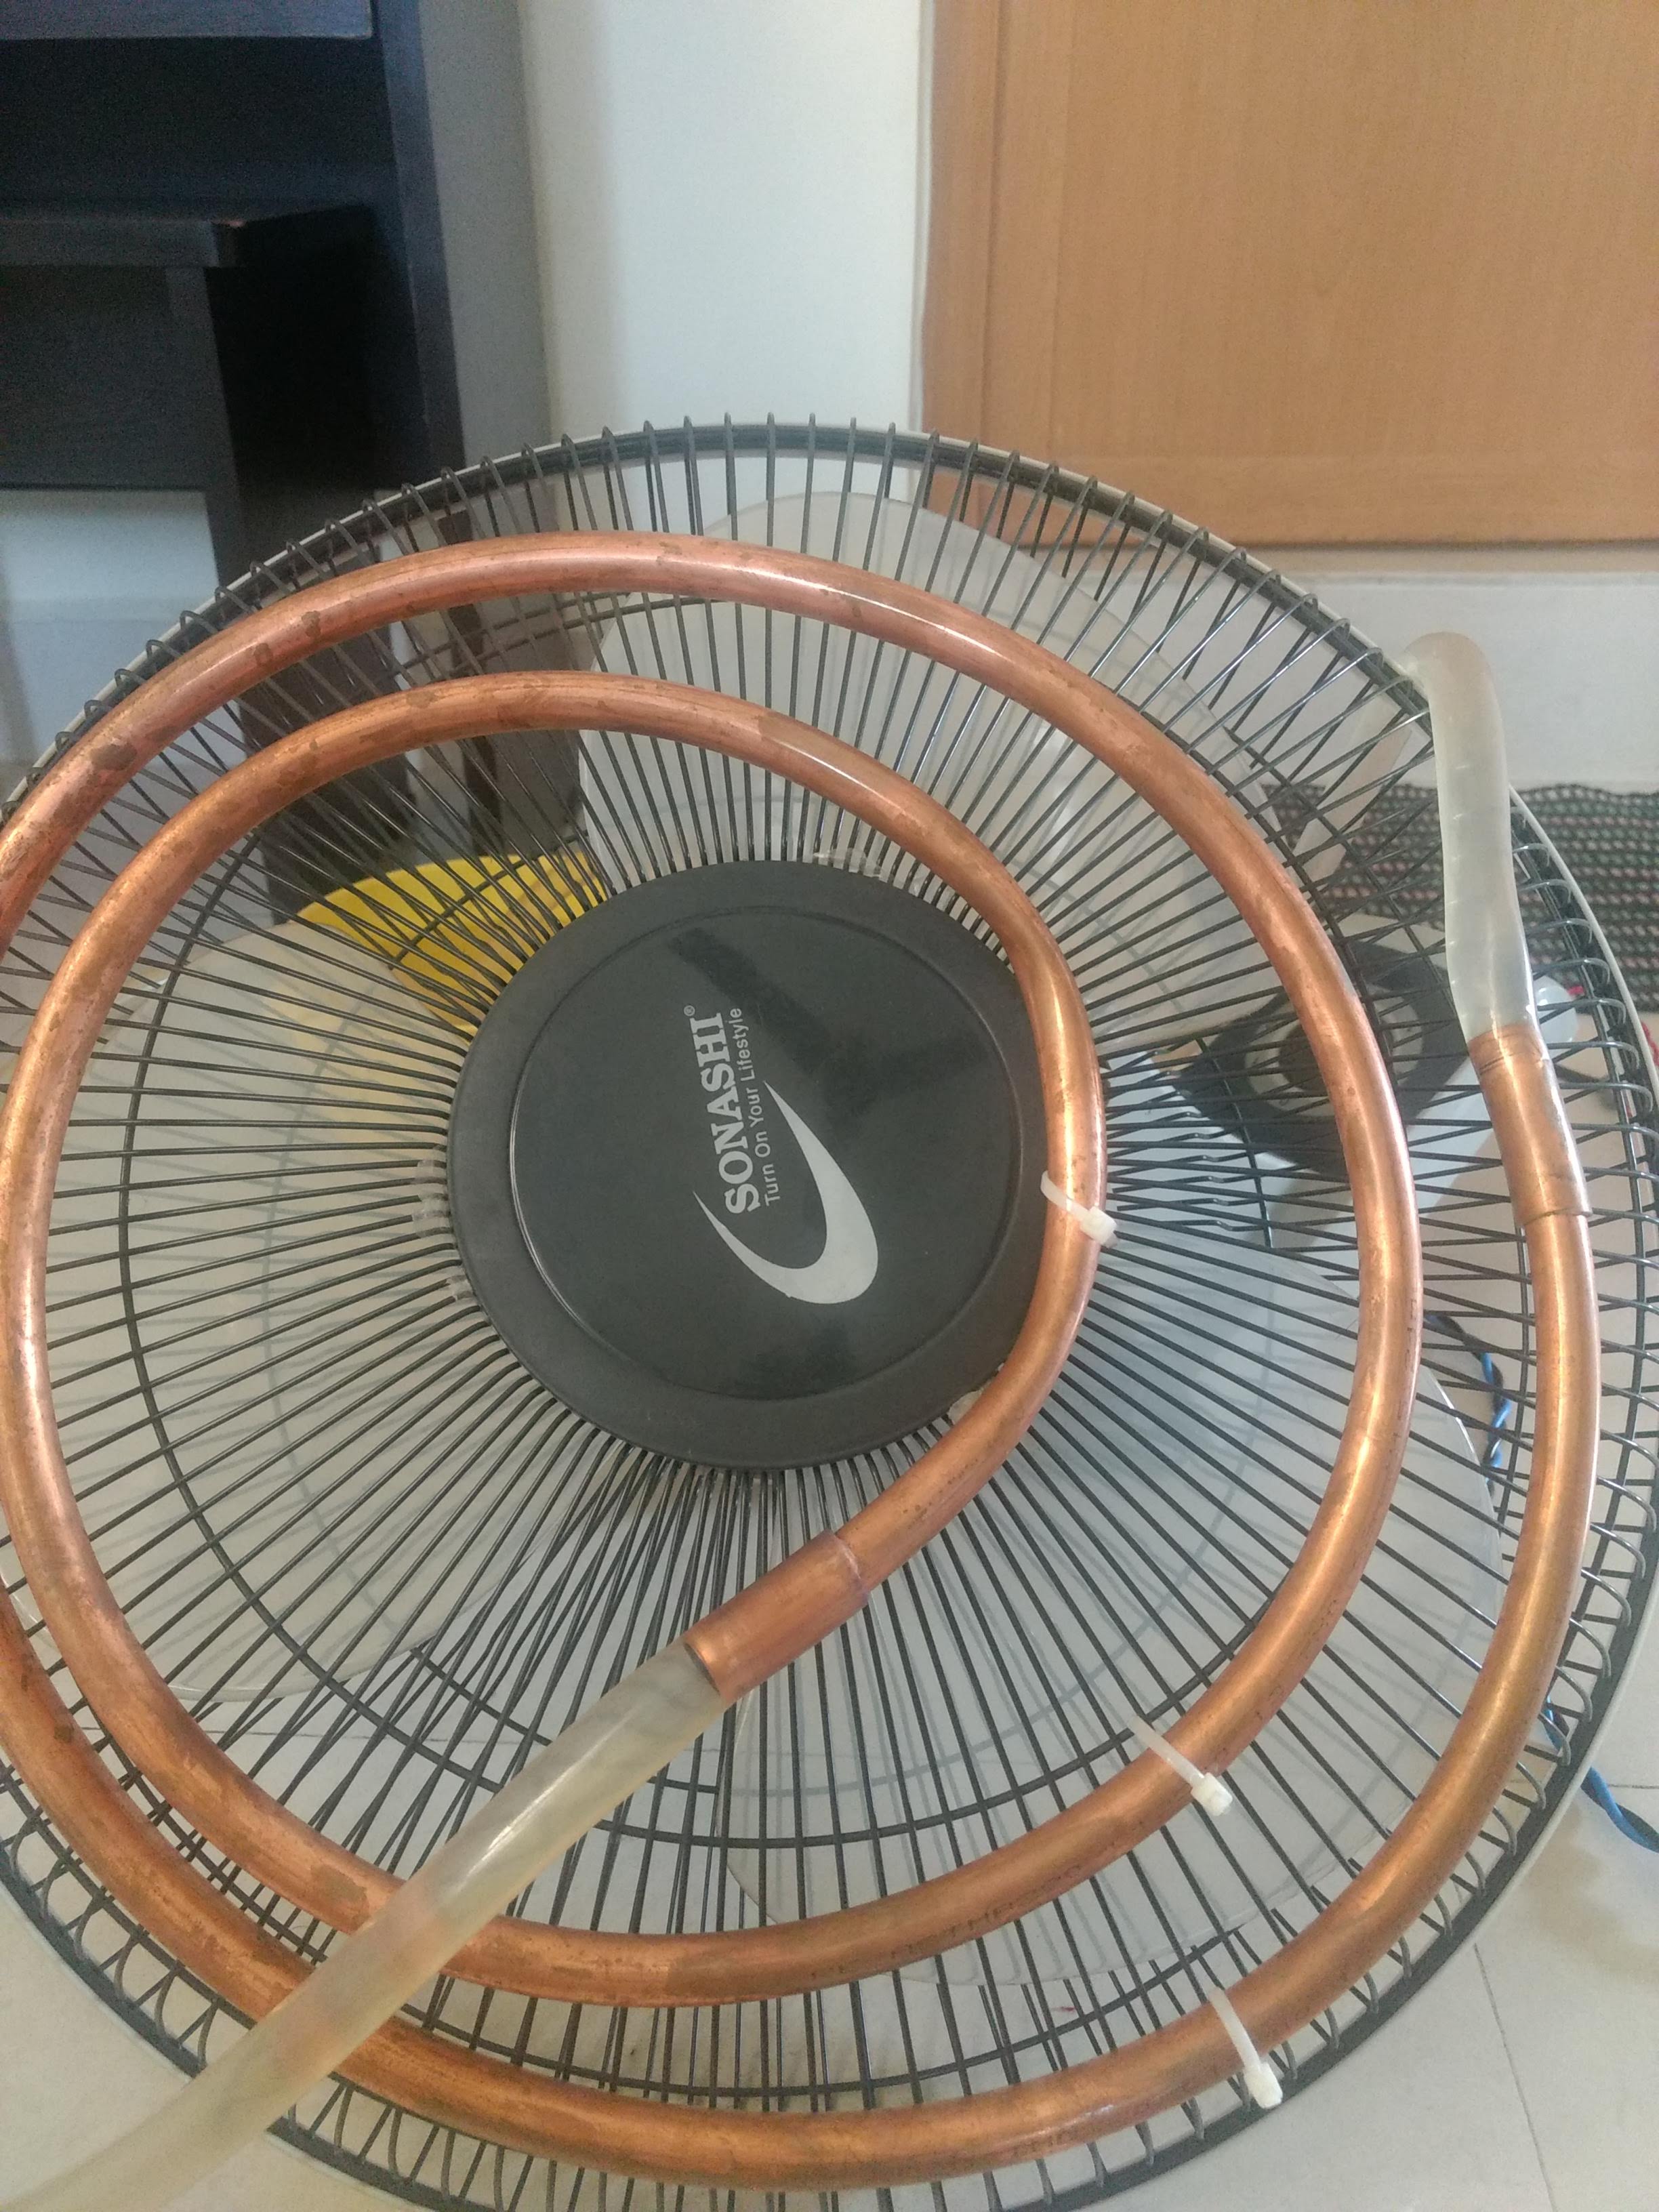 Fan with coil